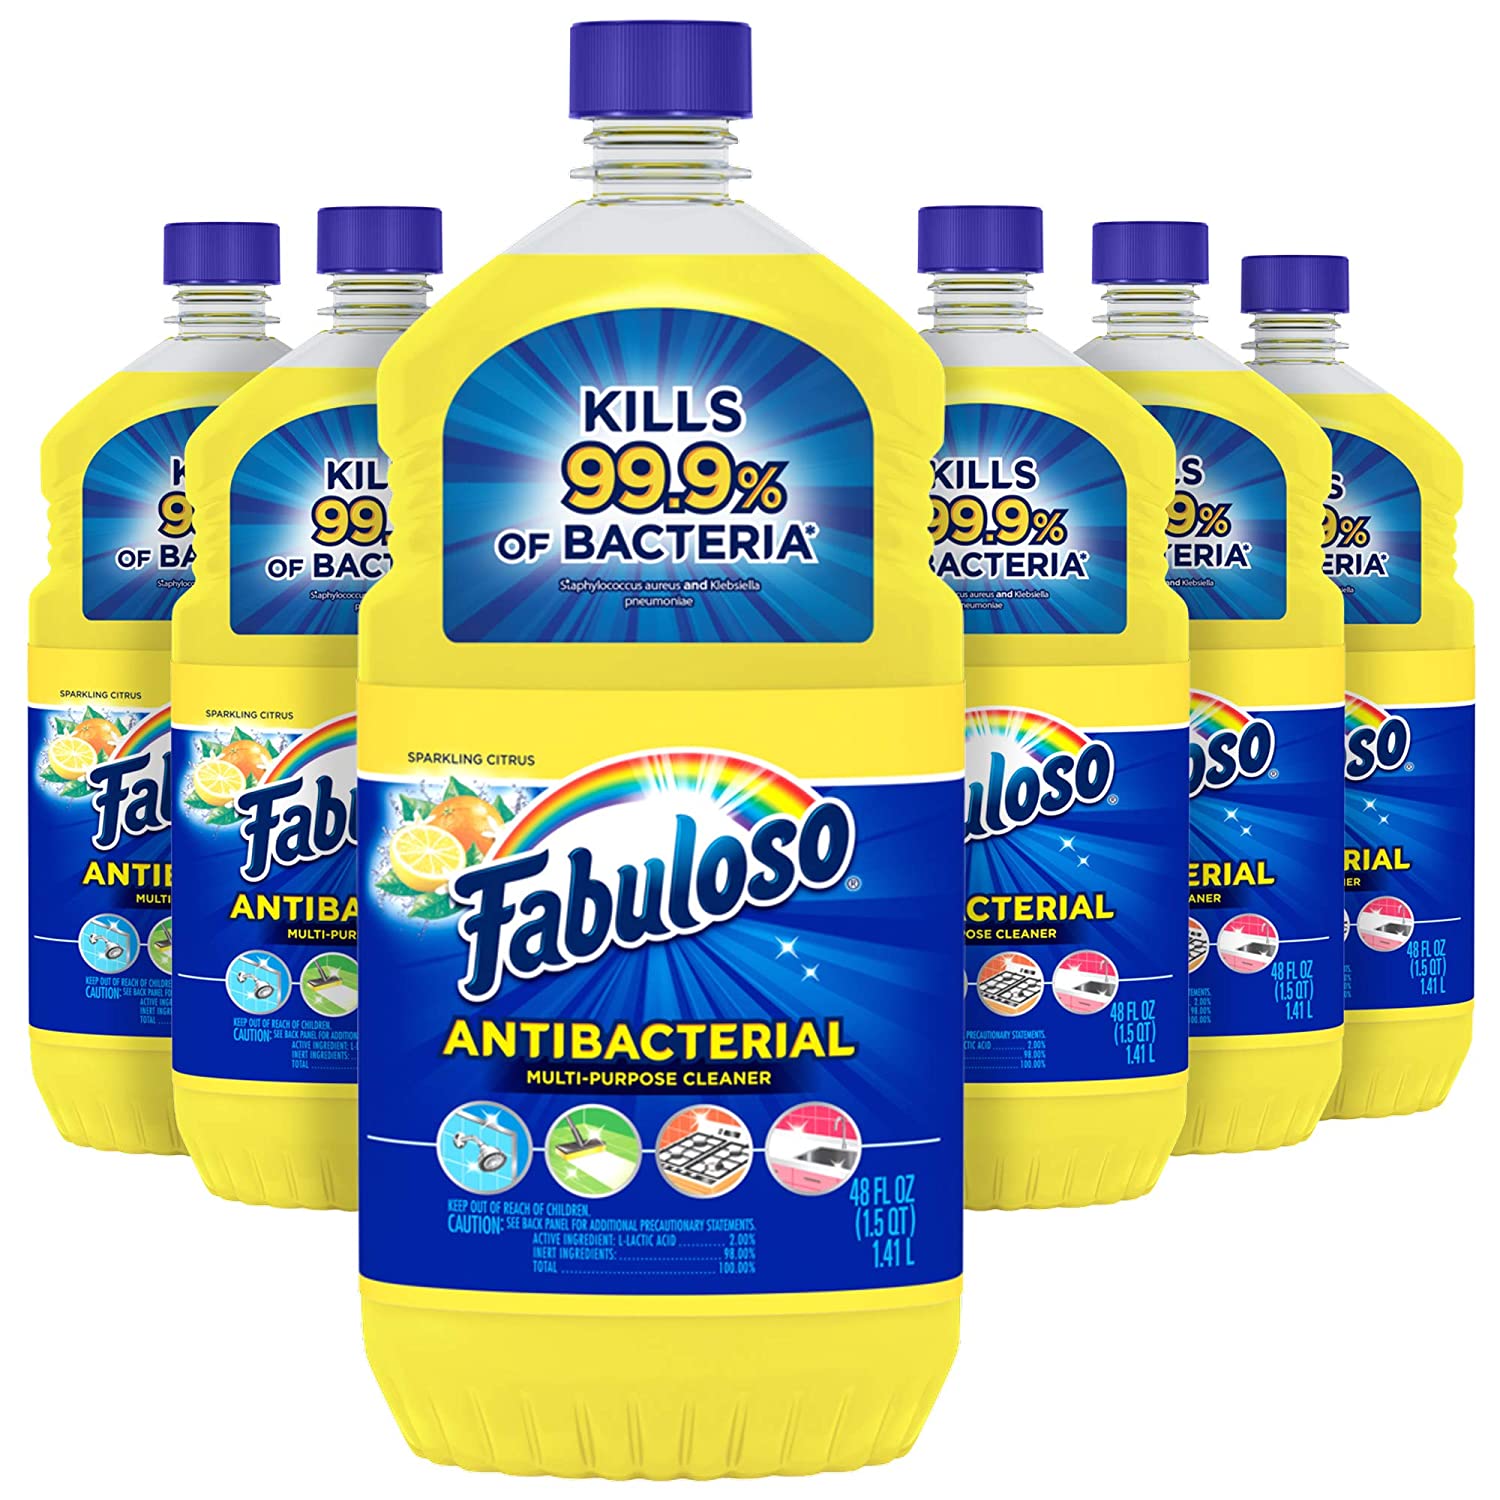 Fabuloso Antibacterial All Purpose Cleaner, Floor Cleaner, Kitchen Clean, Bathroom Cleaner, Sparkling Citrus - 288oz Total (48oz | Case of 6)